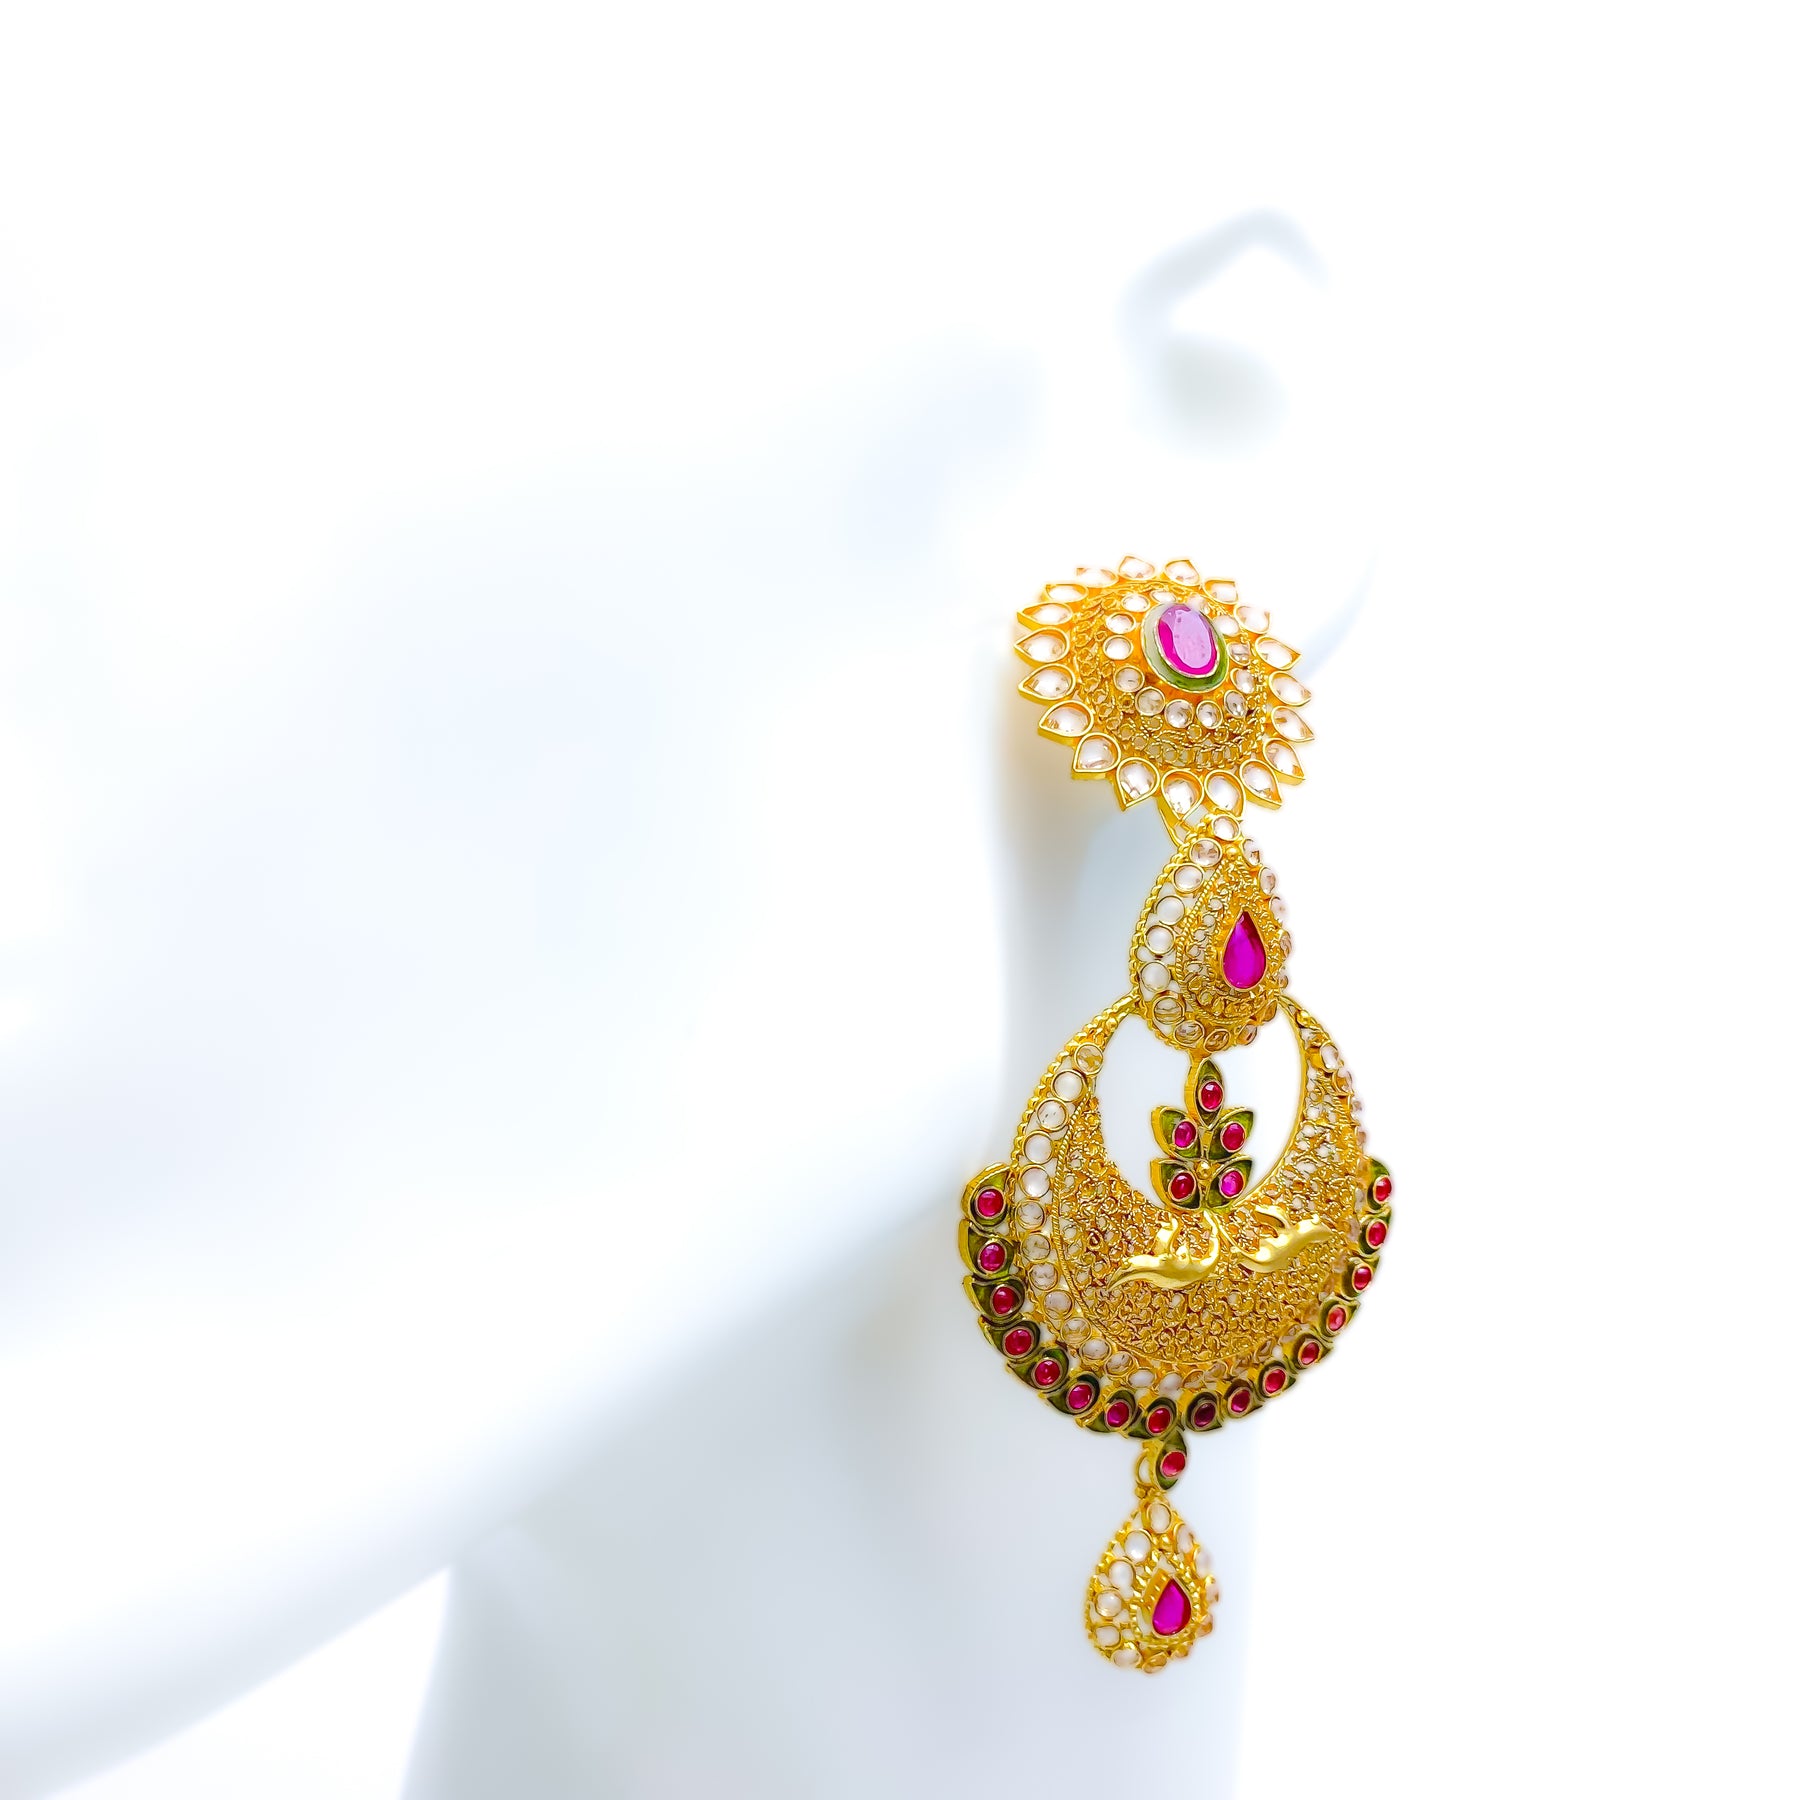 malabar gold earrings/antique chandbali designs/gold antique jhumka designs  with code and price - YouTube